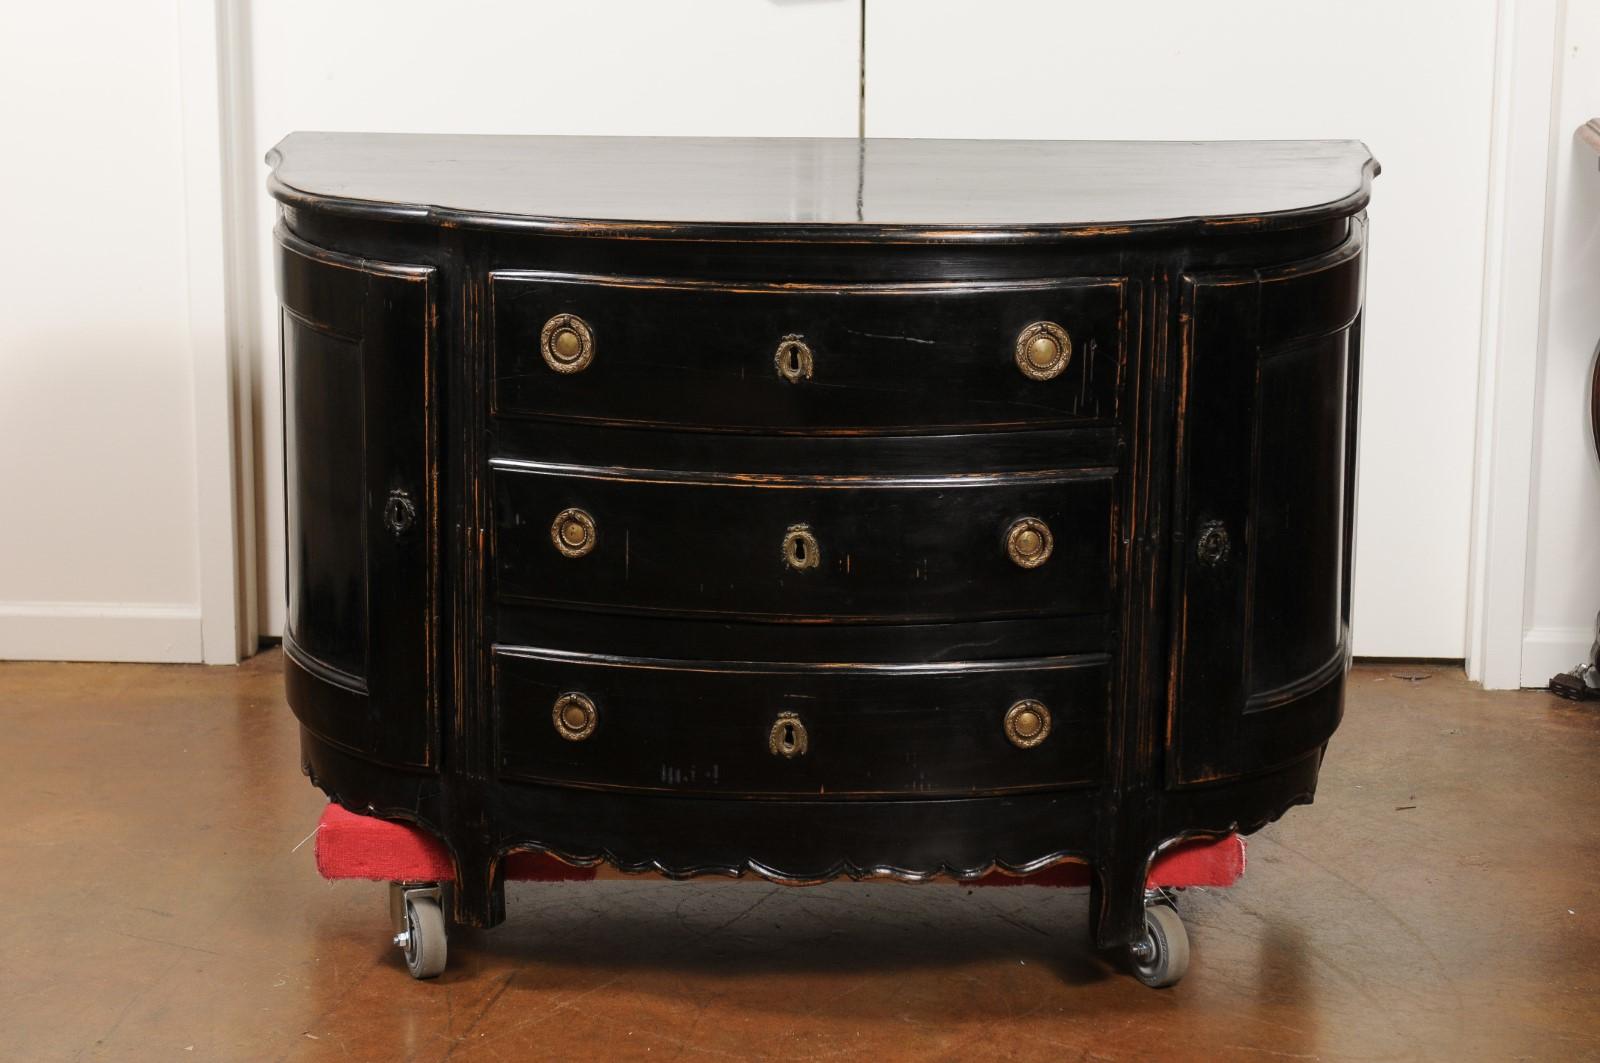 A French ebonized wood demilune credenza from the 19th century with three drawers and side doors. Born in France during the ever-changing 19th century, this French chest cabinet features a semi-circular top with serpentine accents, sitting above